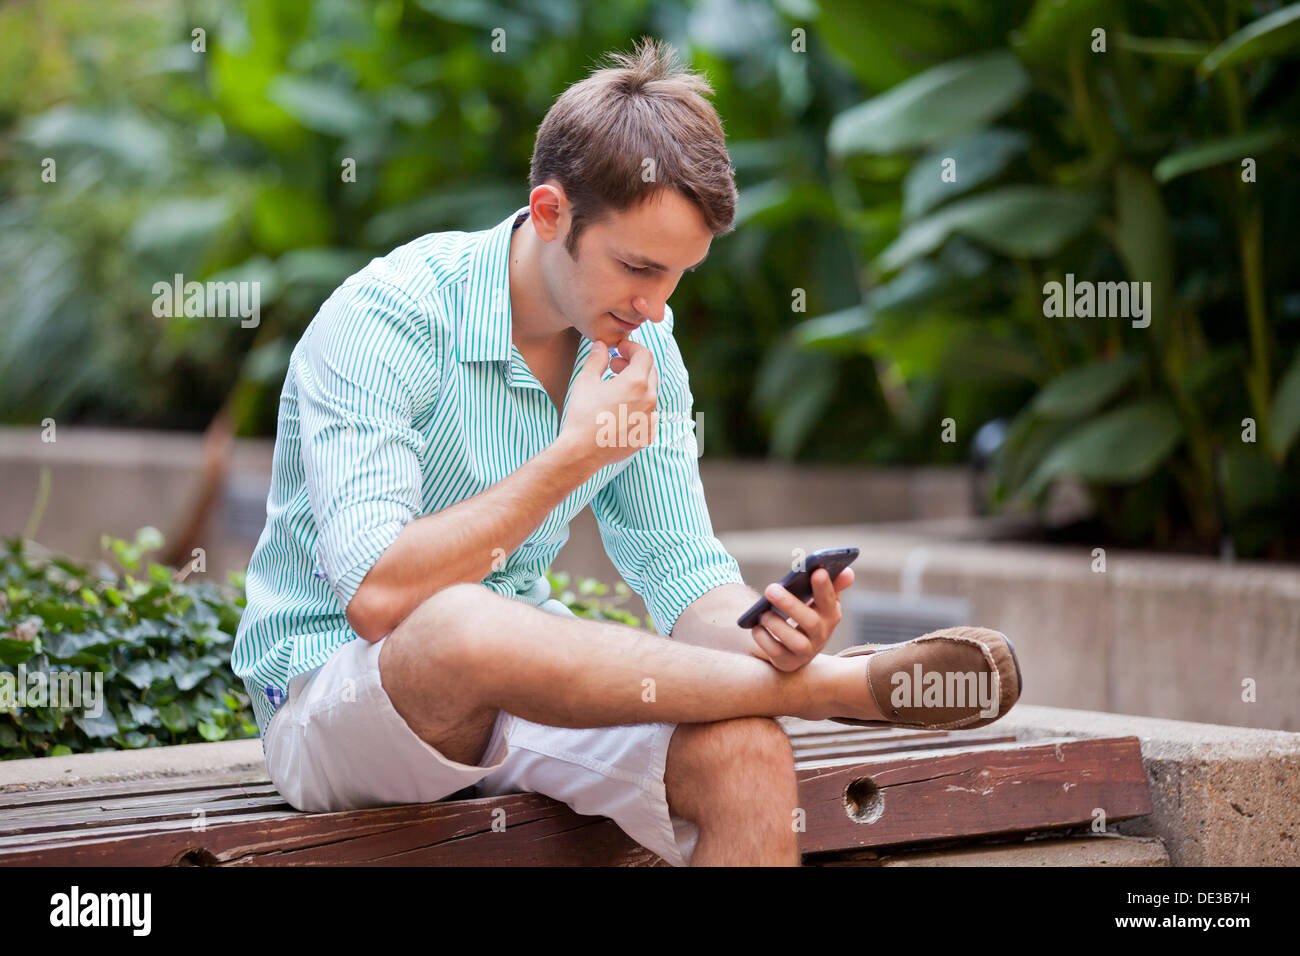 Man sitting in garden using a smart phone Stock Photo